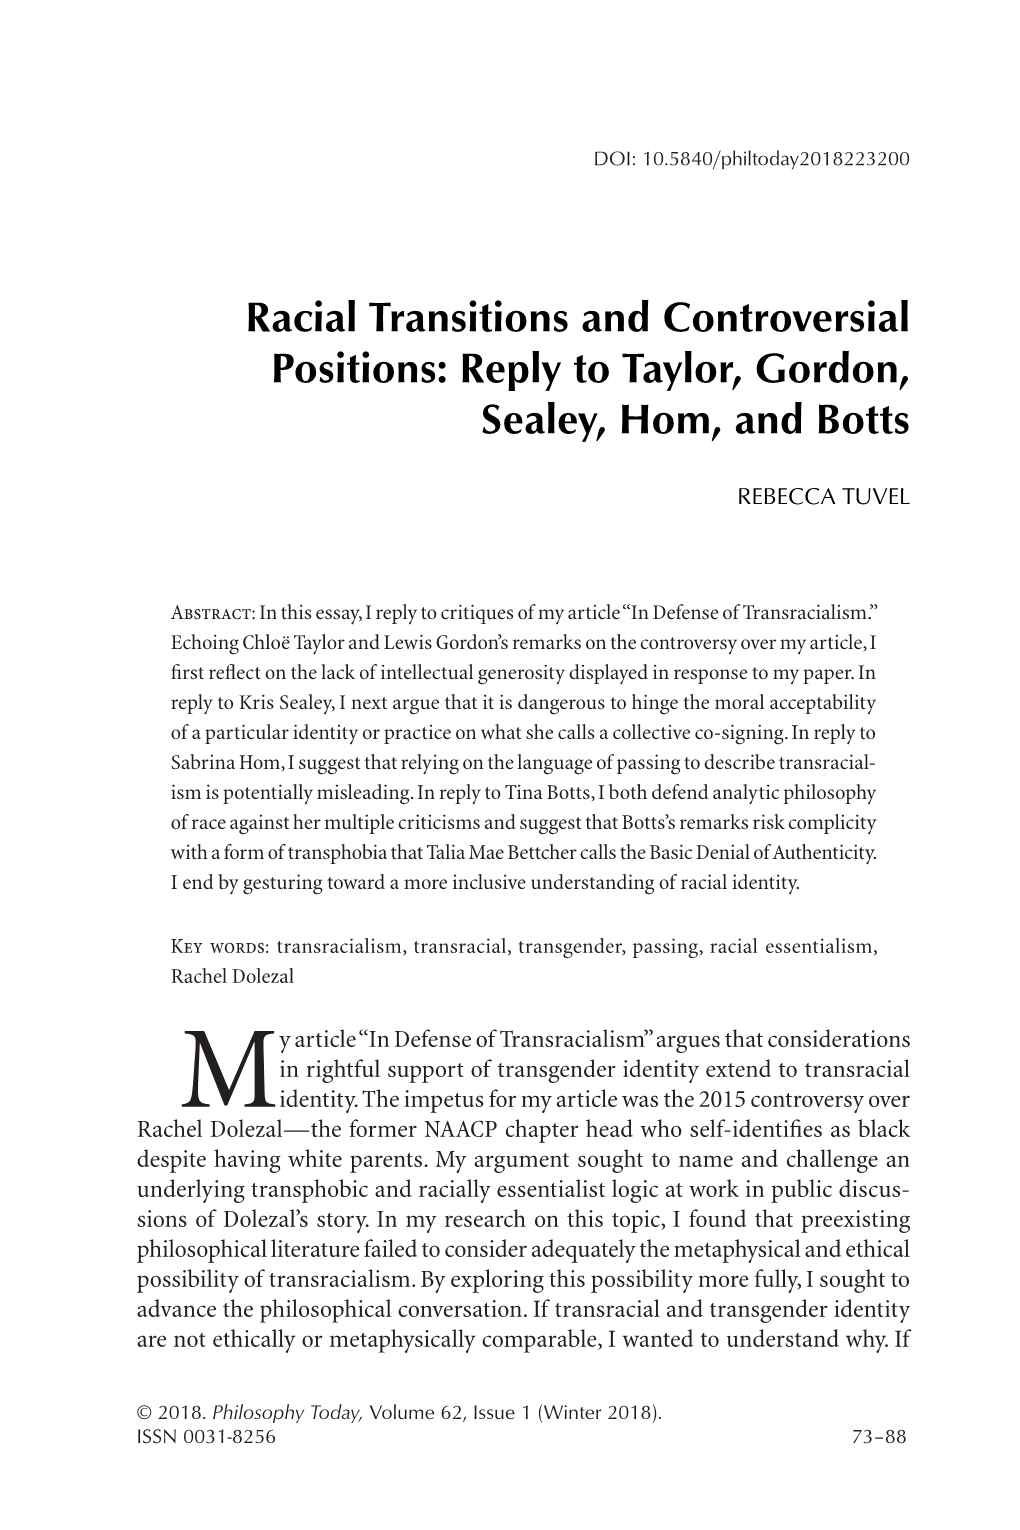 Racial Transitions and Controversial Positions: Reply to Taylor, Gordon, Sealey, Hom, and Botts